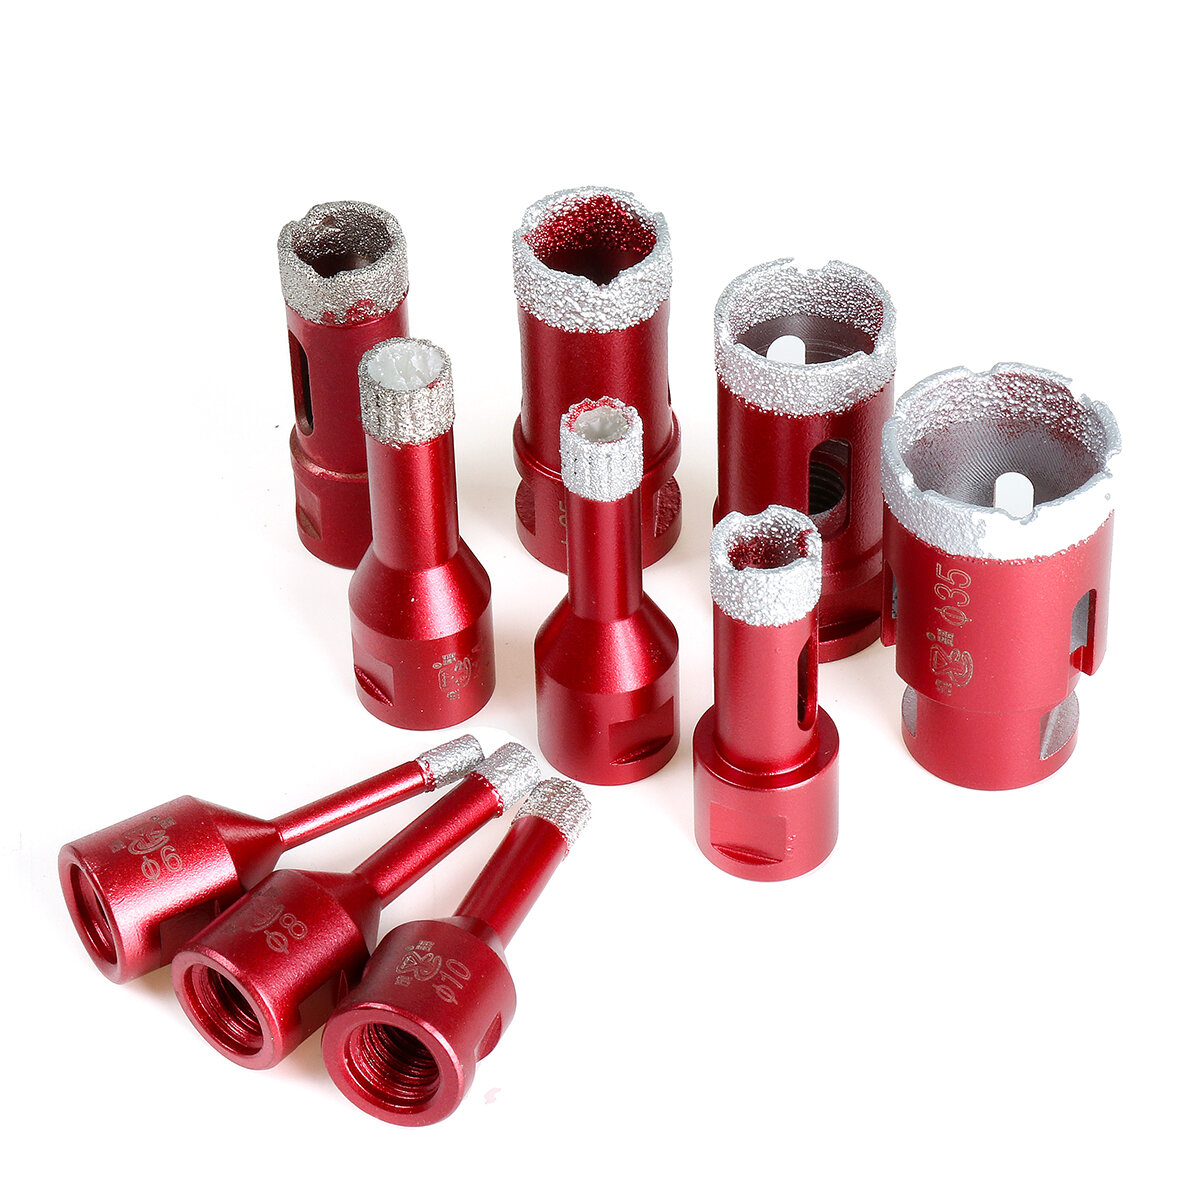 6mm-35mm M14 Diamond Drill Bits Drilling Hole Saw Cutter for Tile Marble Granite Stone Use Angle Grinder